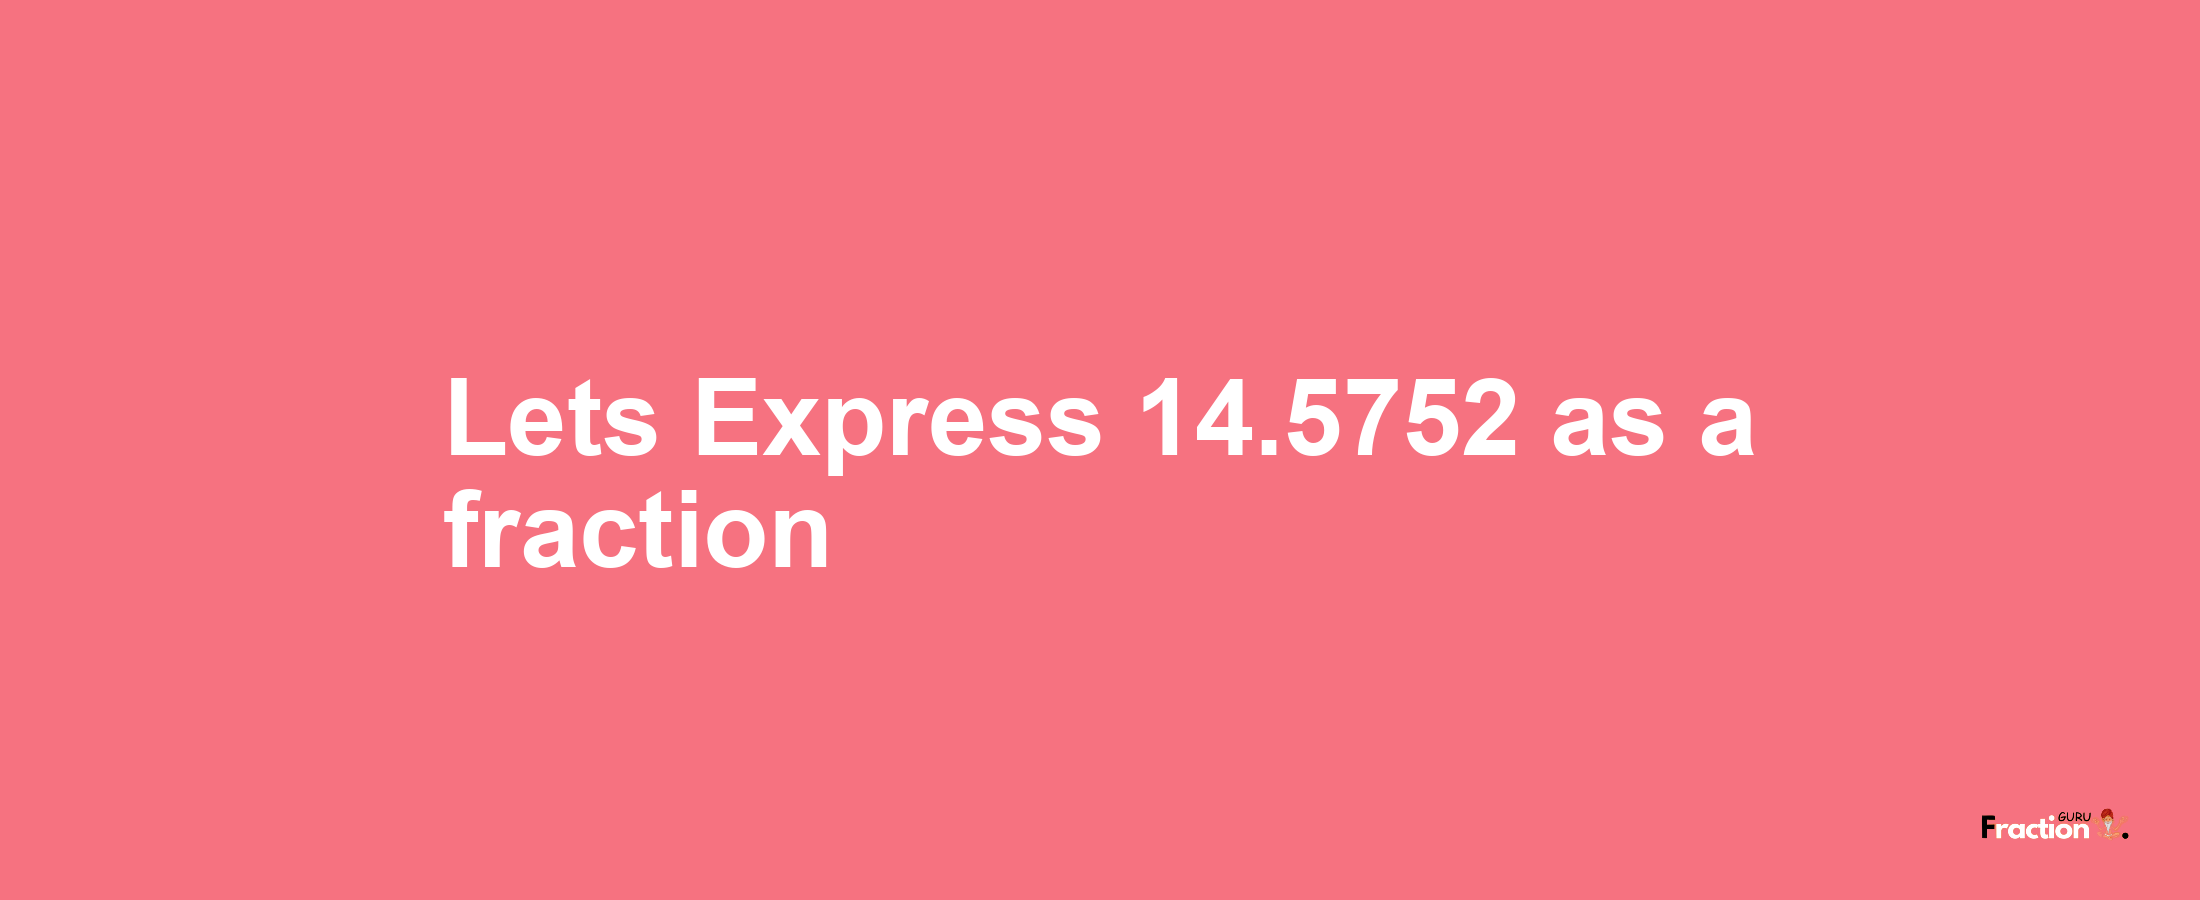 Lets Express 14.5752 as afraction